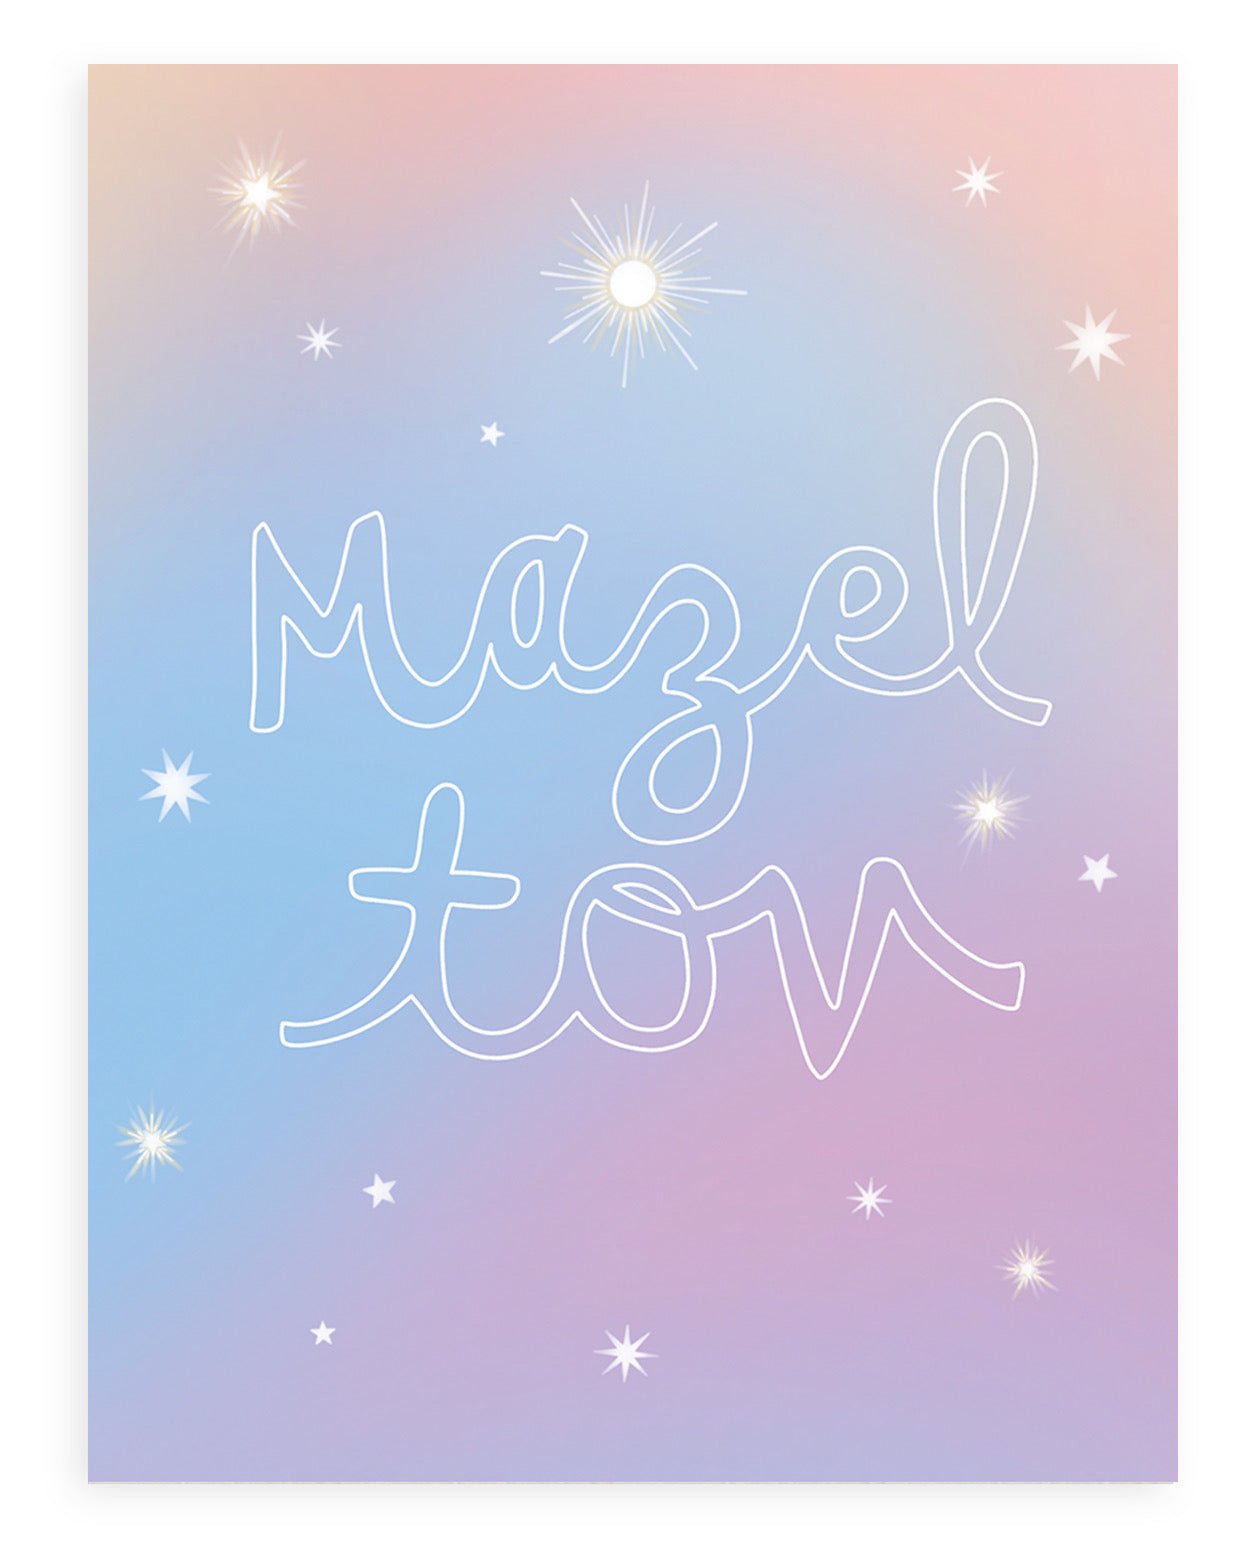 &quot;Mazel Tov&quot; in large, hollow cursive on a gradient blue-lavender background with various kinds of stars printed on cardstock with a white background.